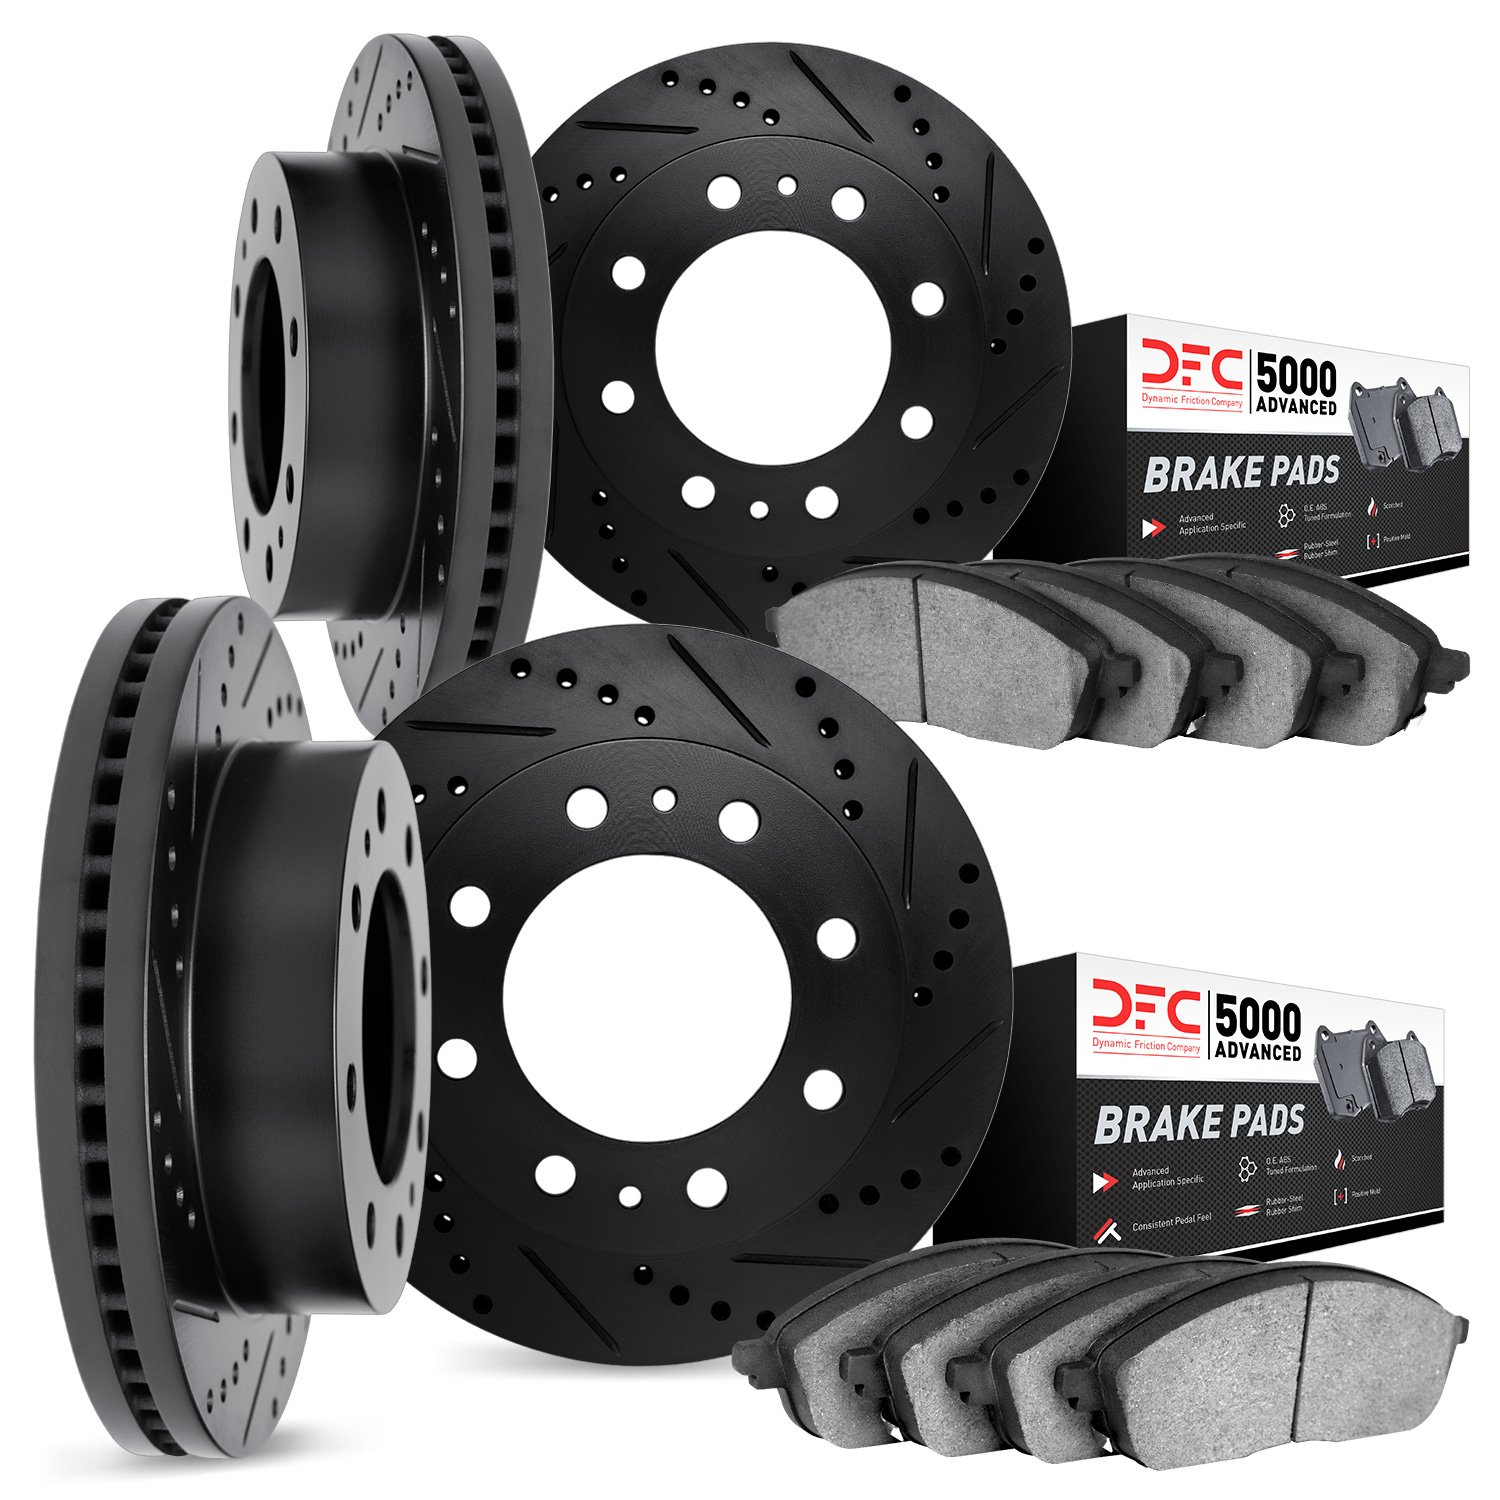 8504-48050 Drilled/Slotted Brake Rotors w/5000 Advanced Brake Pads Kit [Black], Fits Select GM, Position: Front and Rear